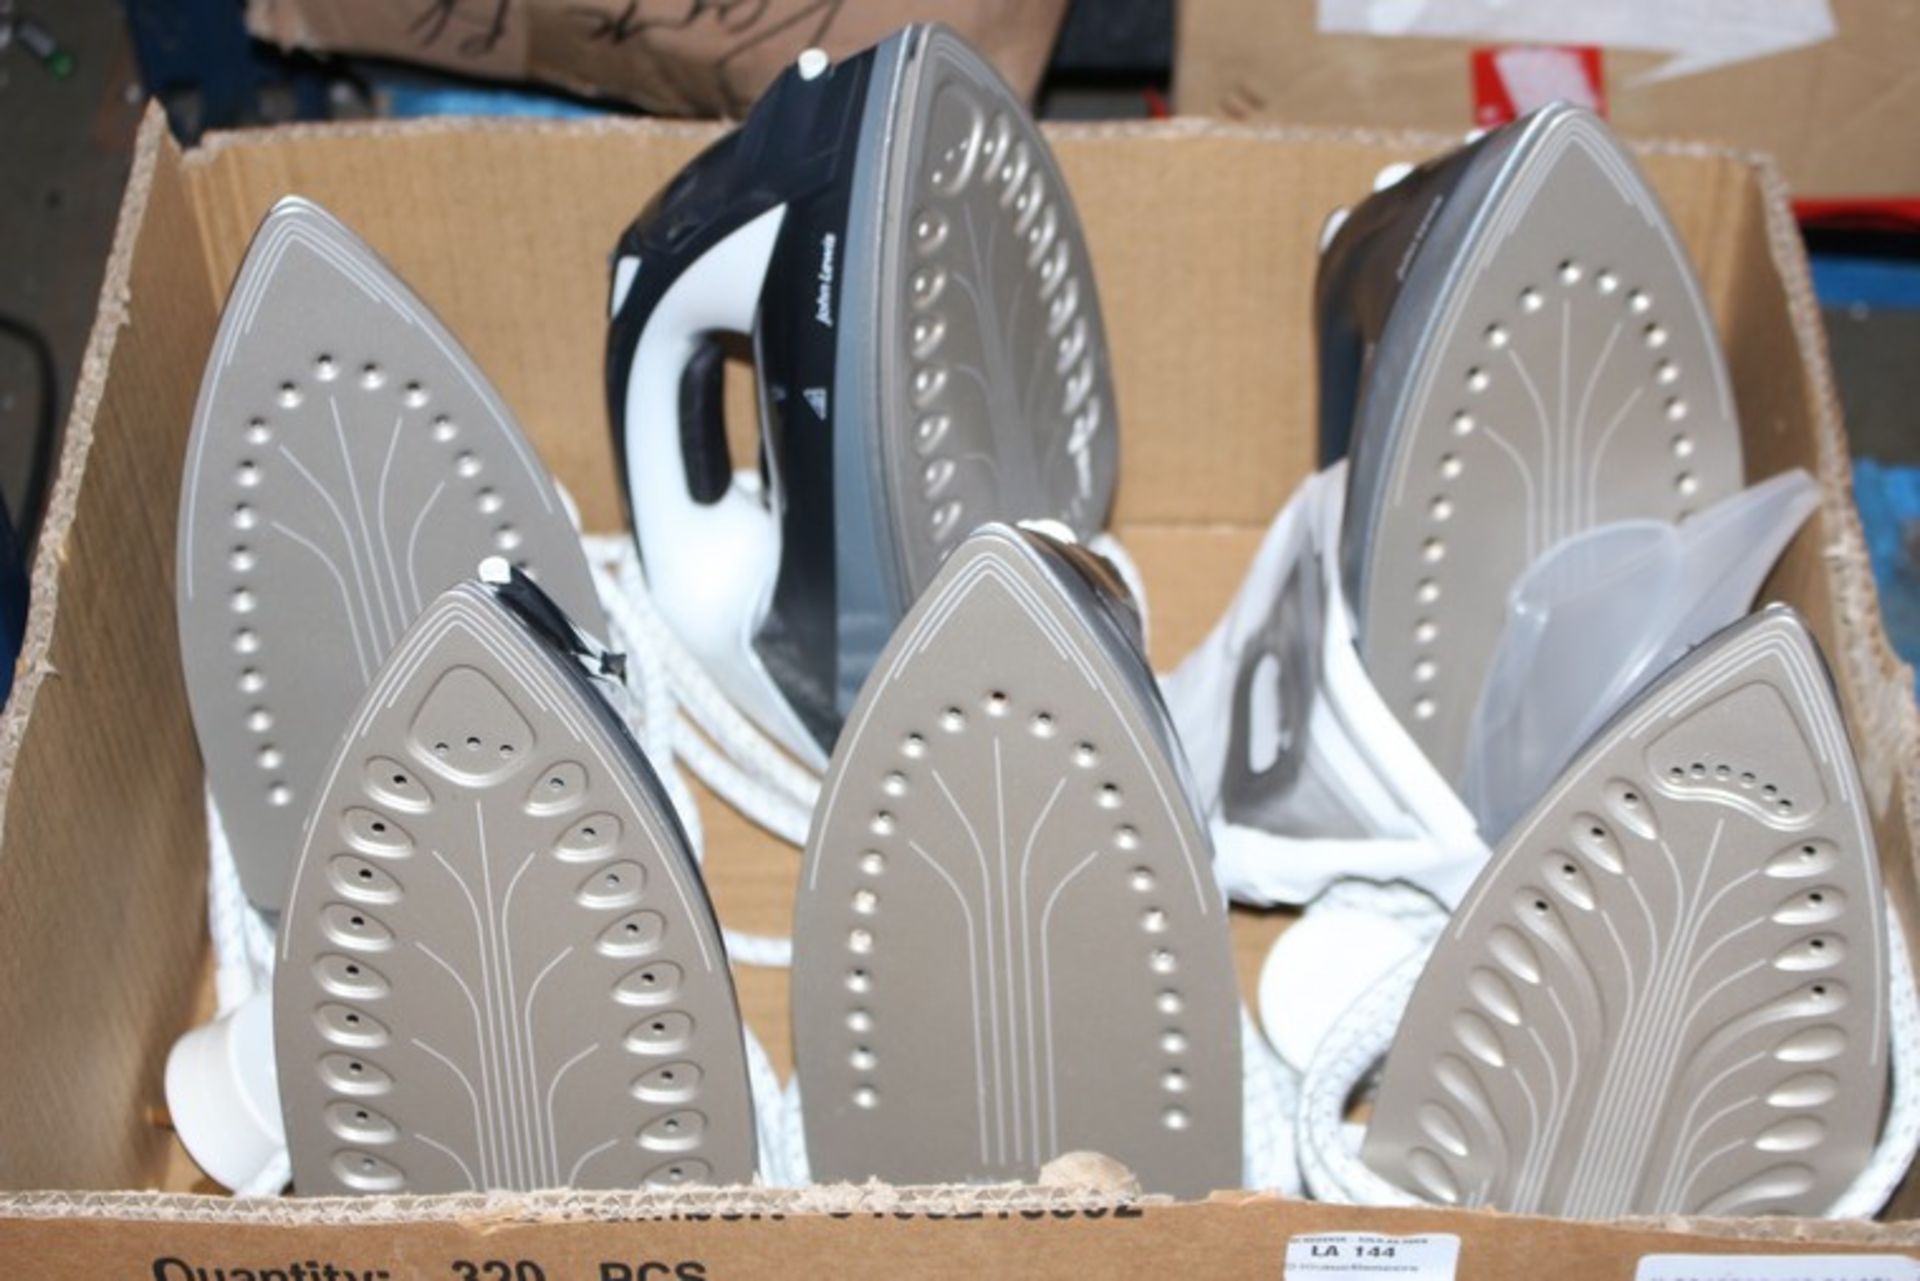 6 x JOHN LEWIS STEAM IRONS (05.01.18) *PLEASE NOTE THAT THE BID PRICE IS MULTIPLIED BY THE NUMBER OF